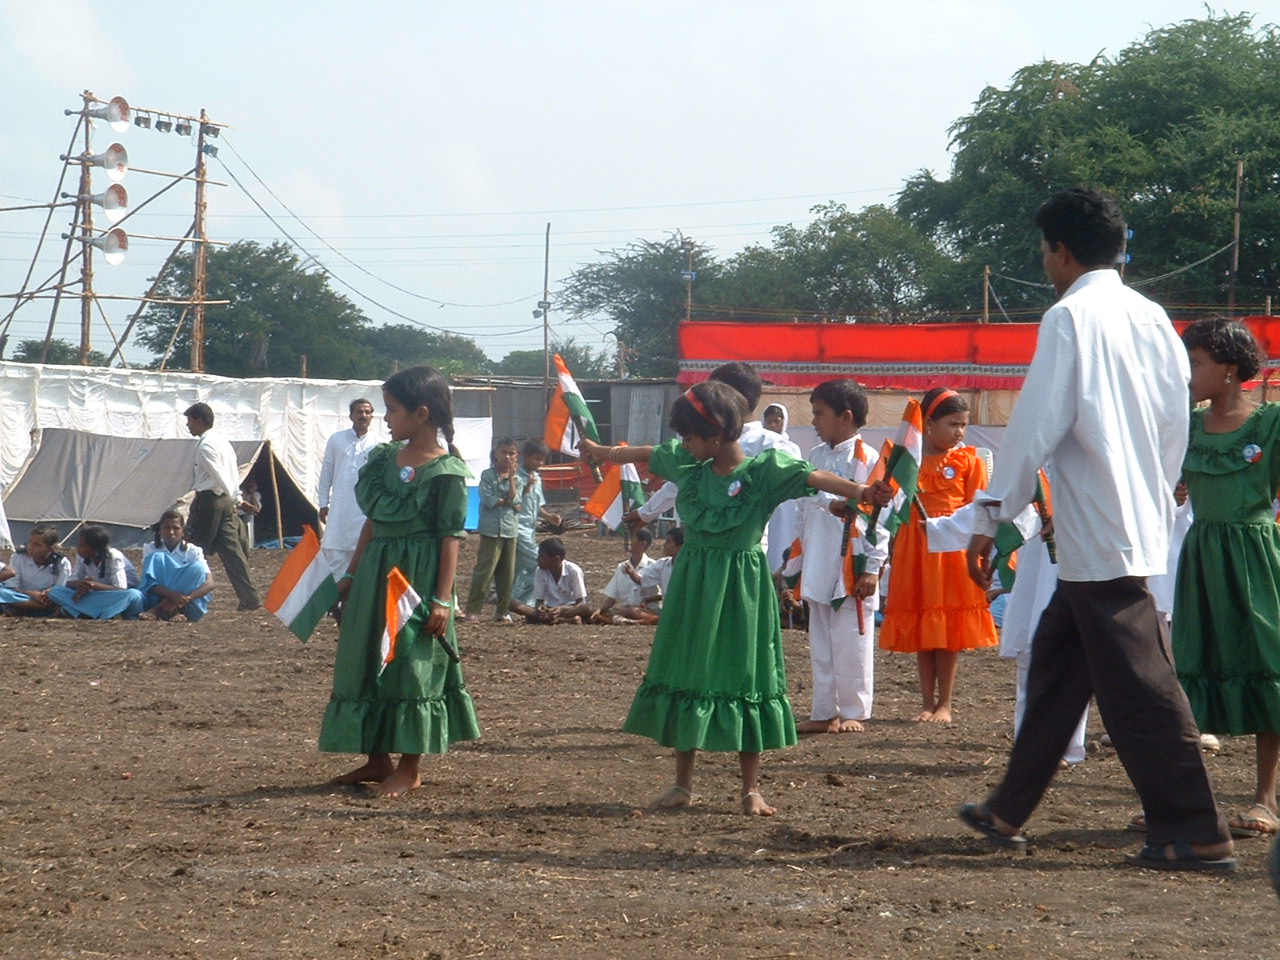 people in traditional costumes dancing at a festival